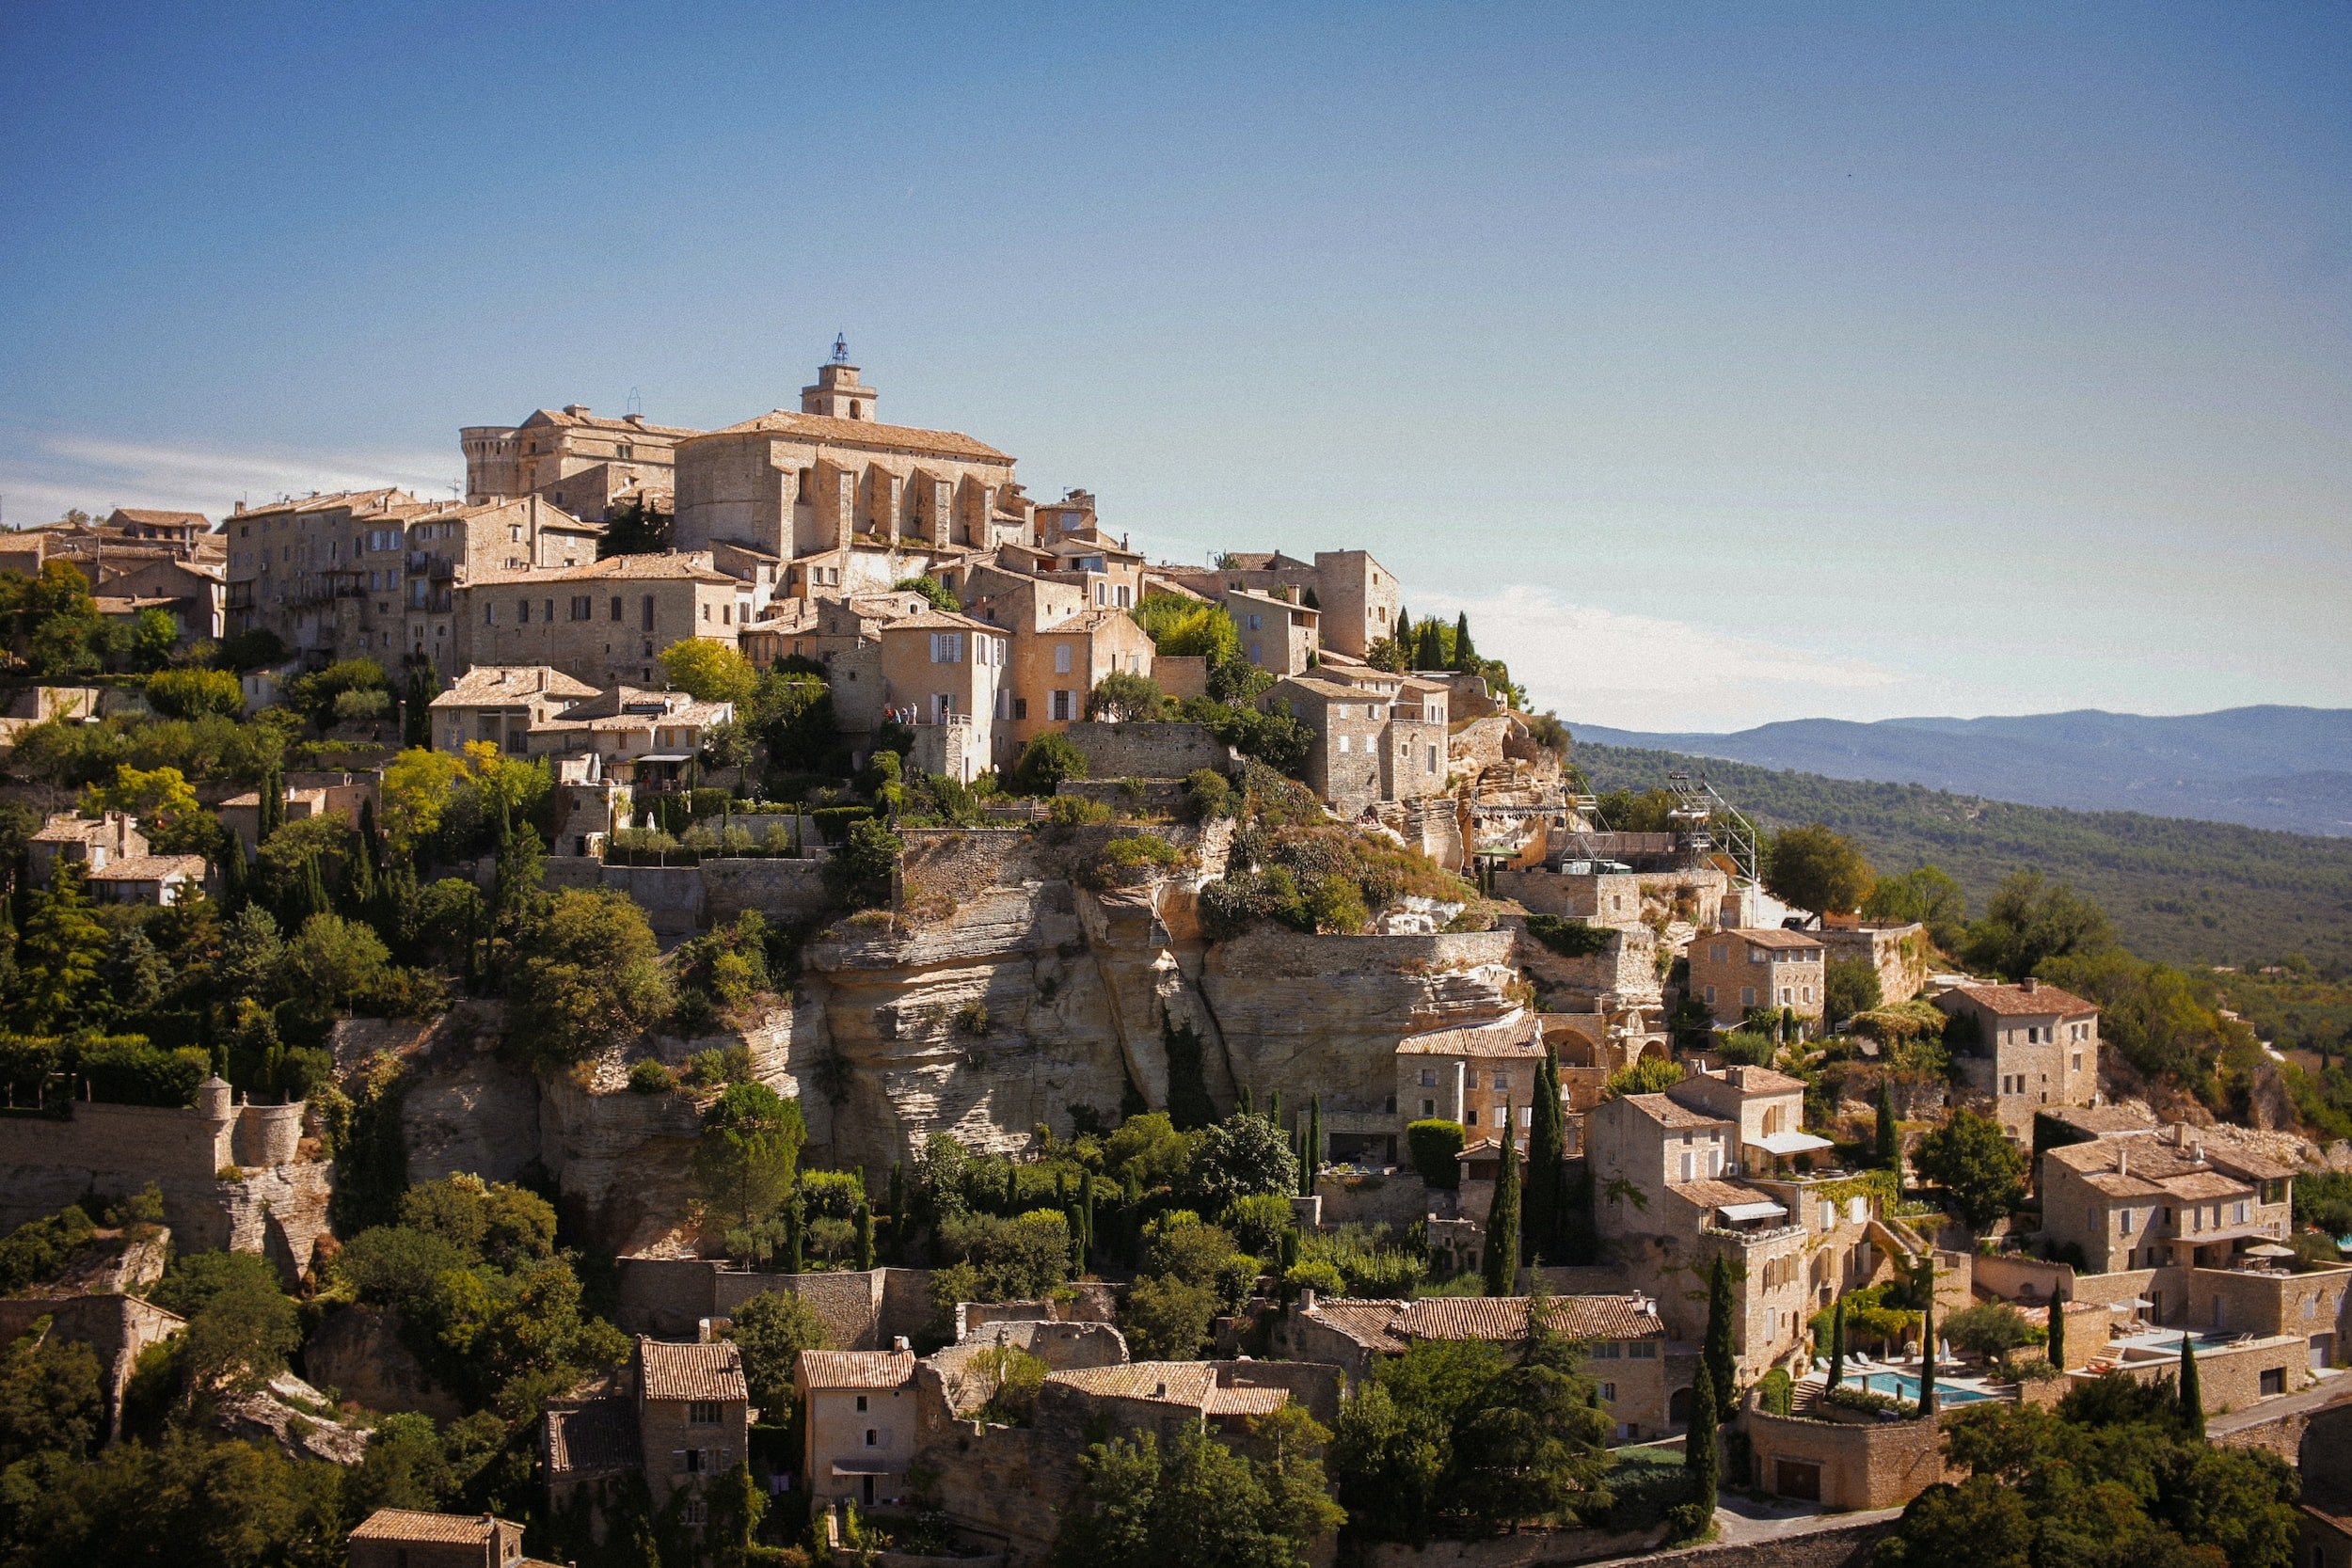 Cultural visit to Gordes in Provence for a company seminar